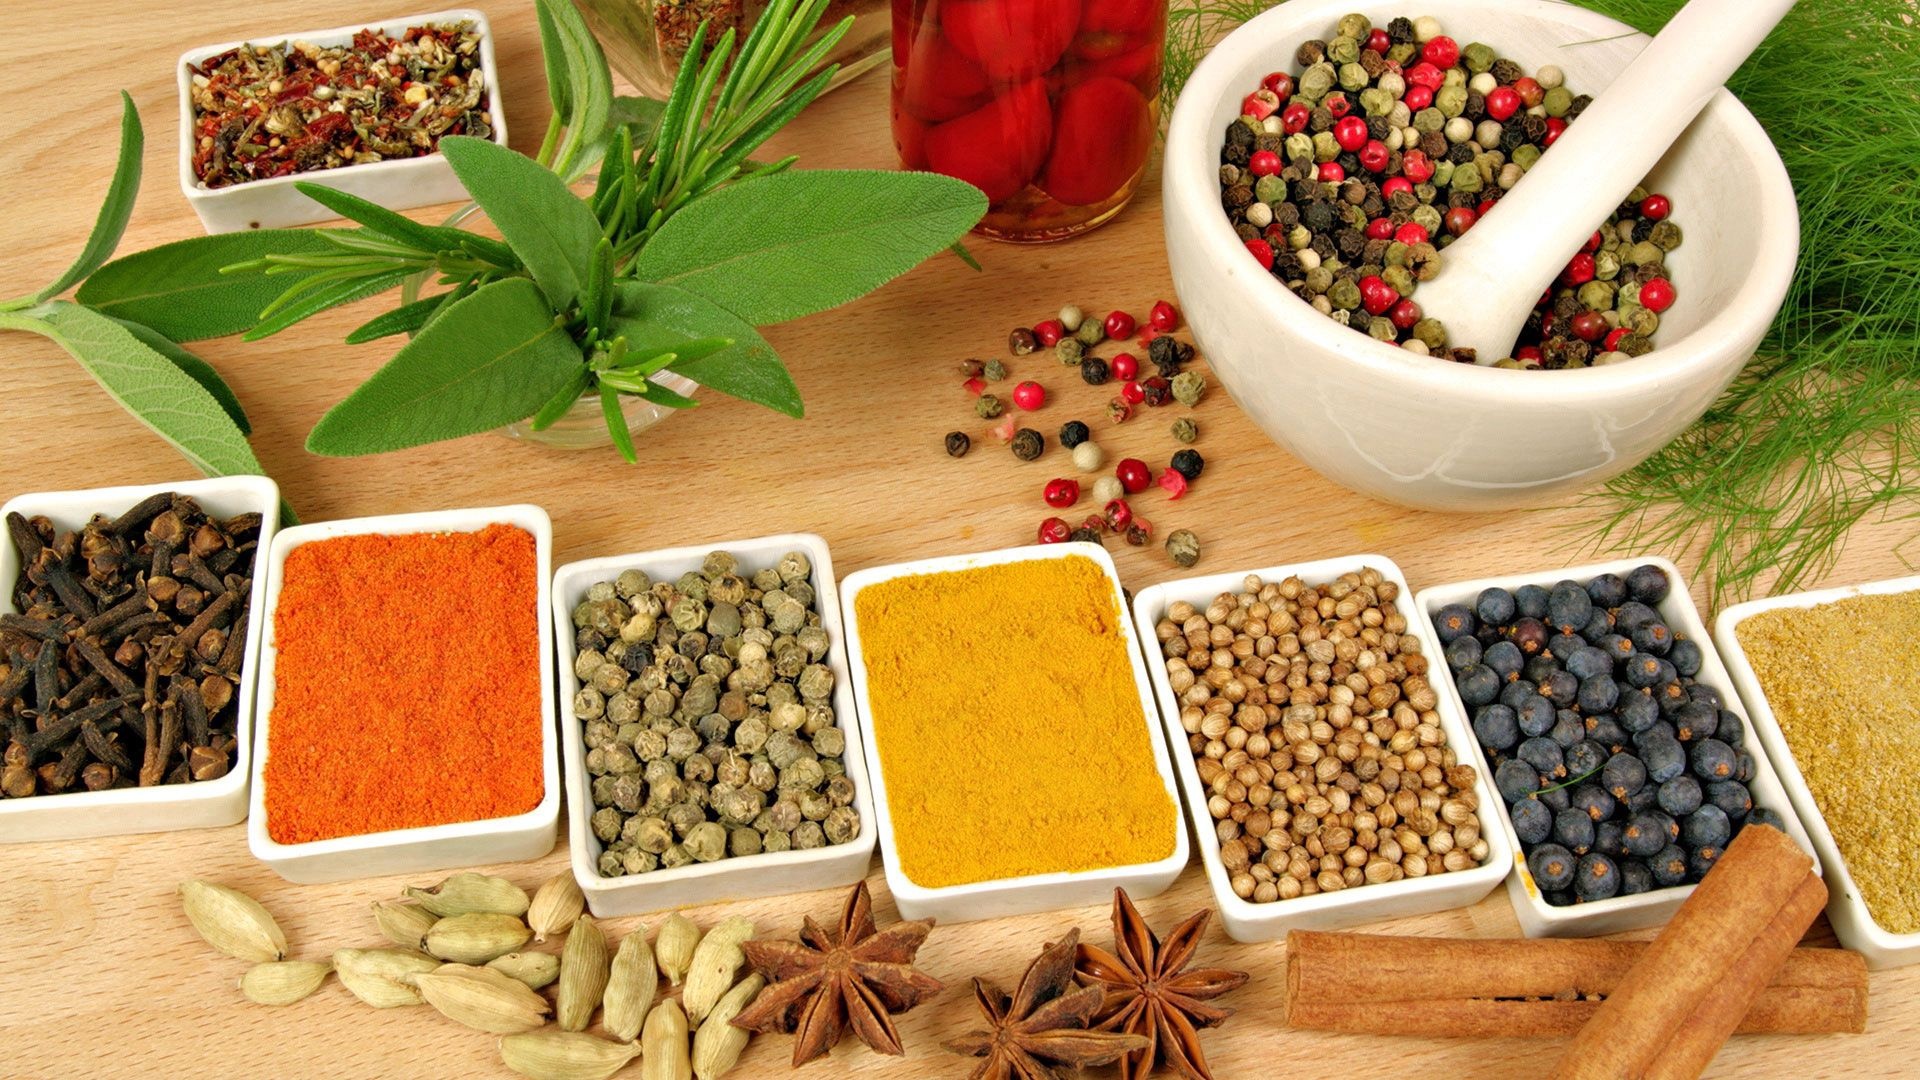 Spices: Assorted seasoning, Cloves, Cinnamon, Powerful flavors and aromas. 1920x1080 Full HD Background.